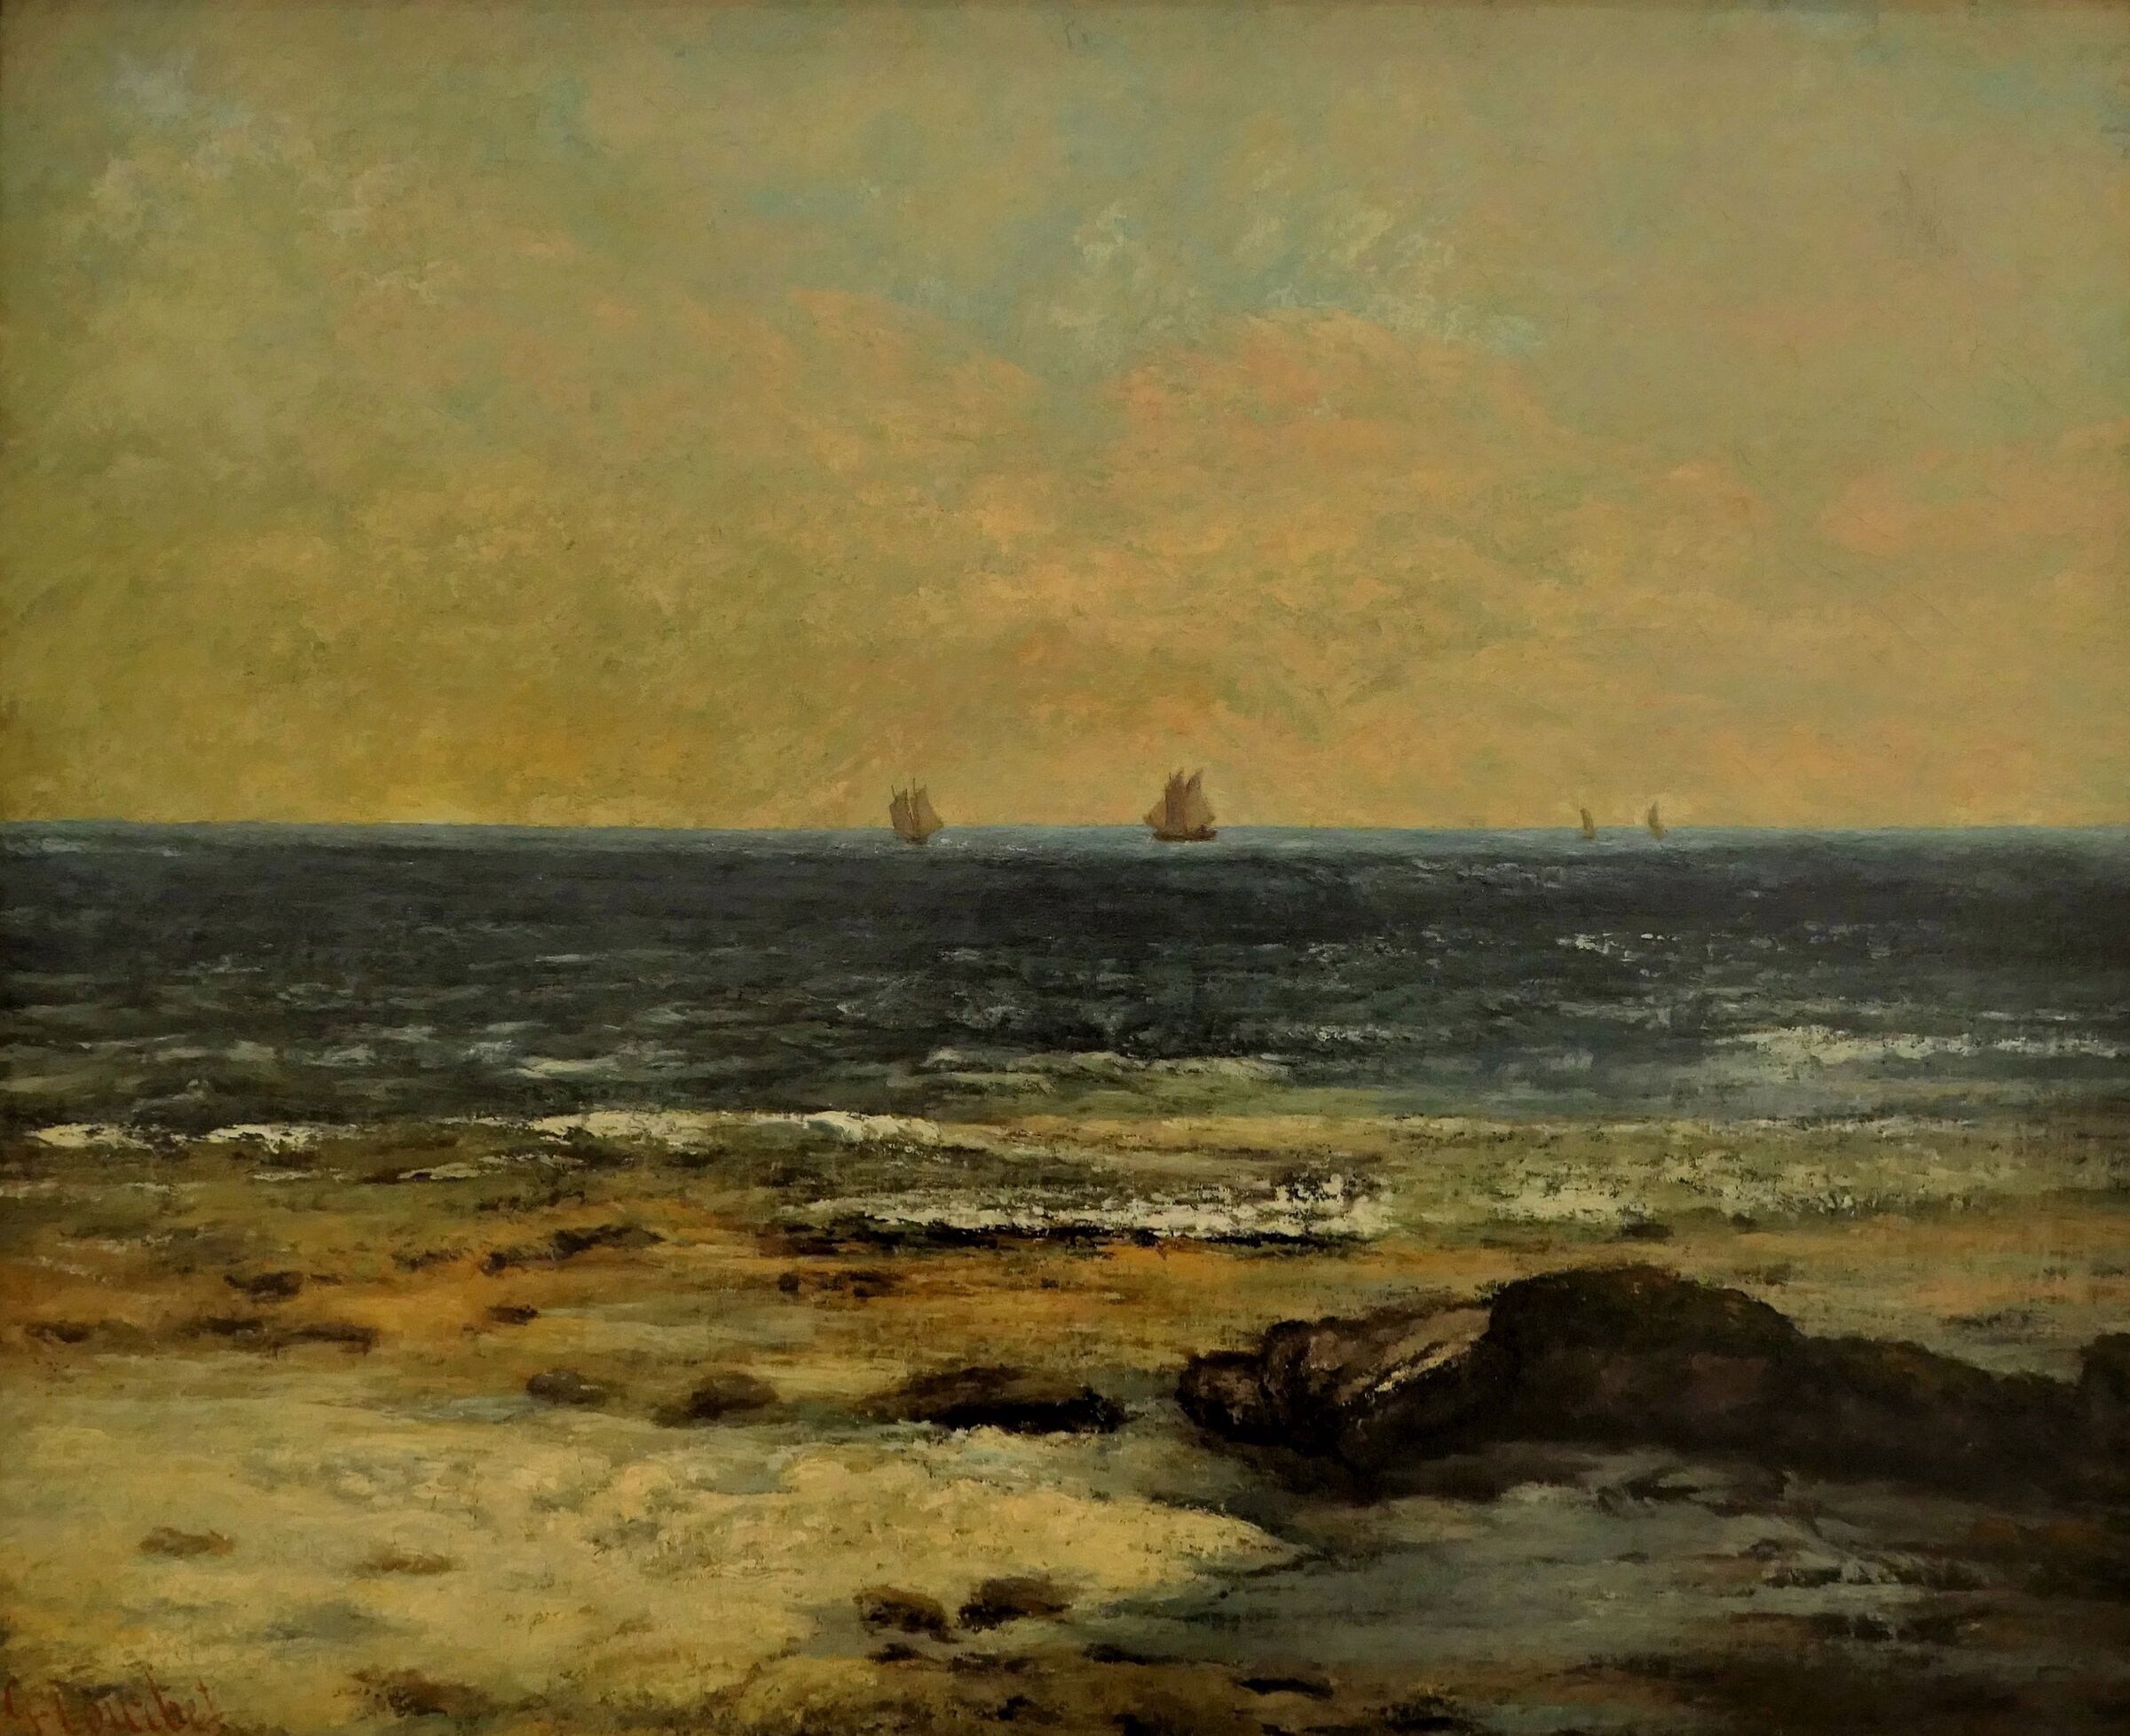 Gustave Courbet "The seashore at Pavalas" (1835)...